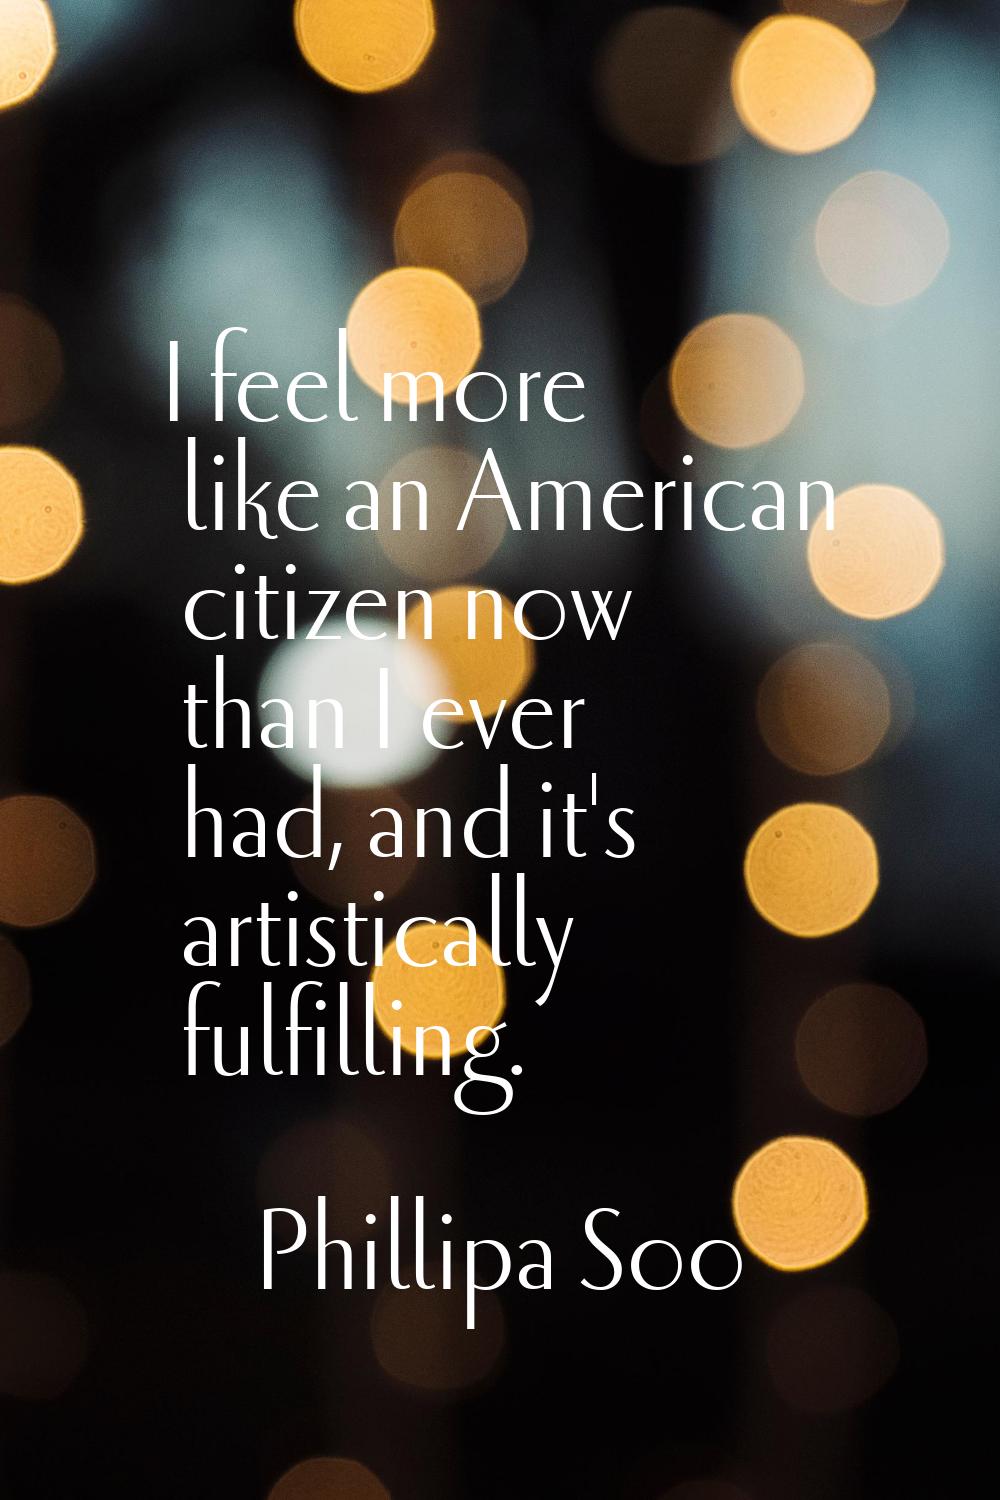 I feel more like an American citizen now than I ever had, and it's artistically fulfilling.